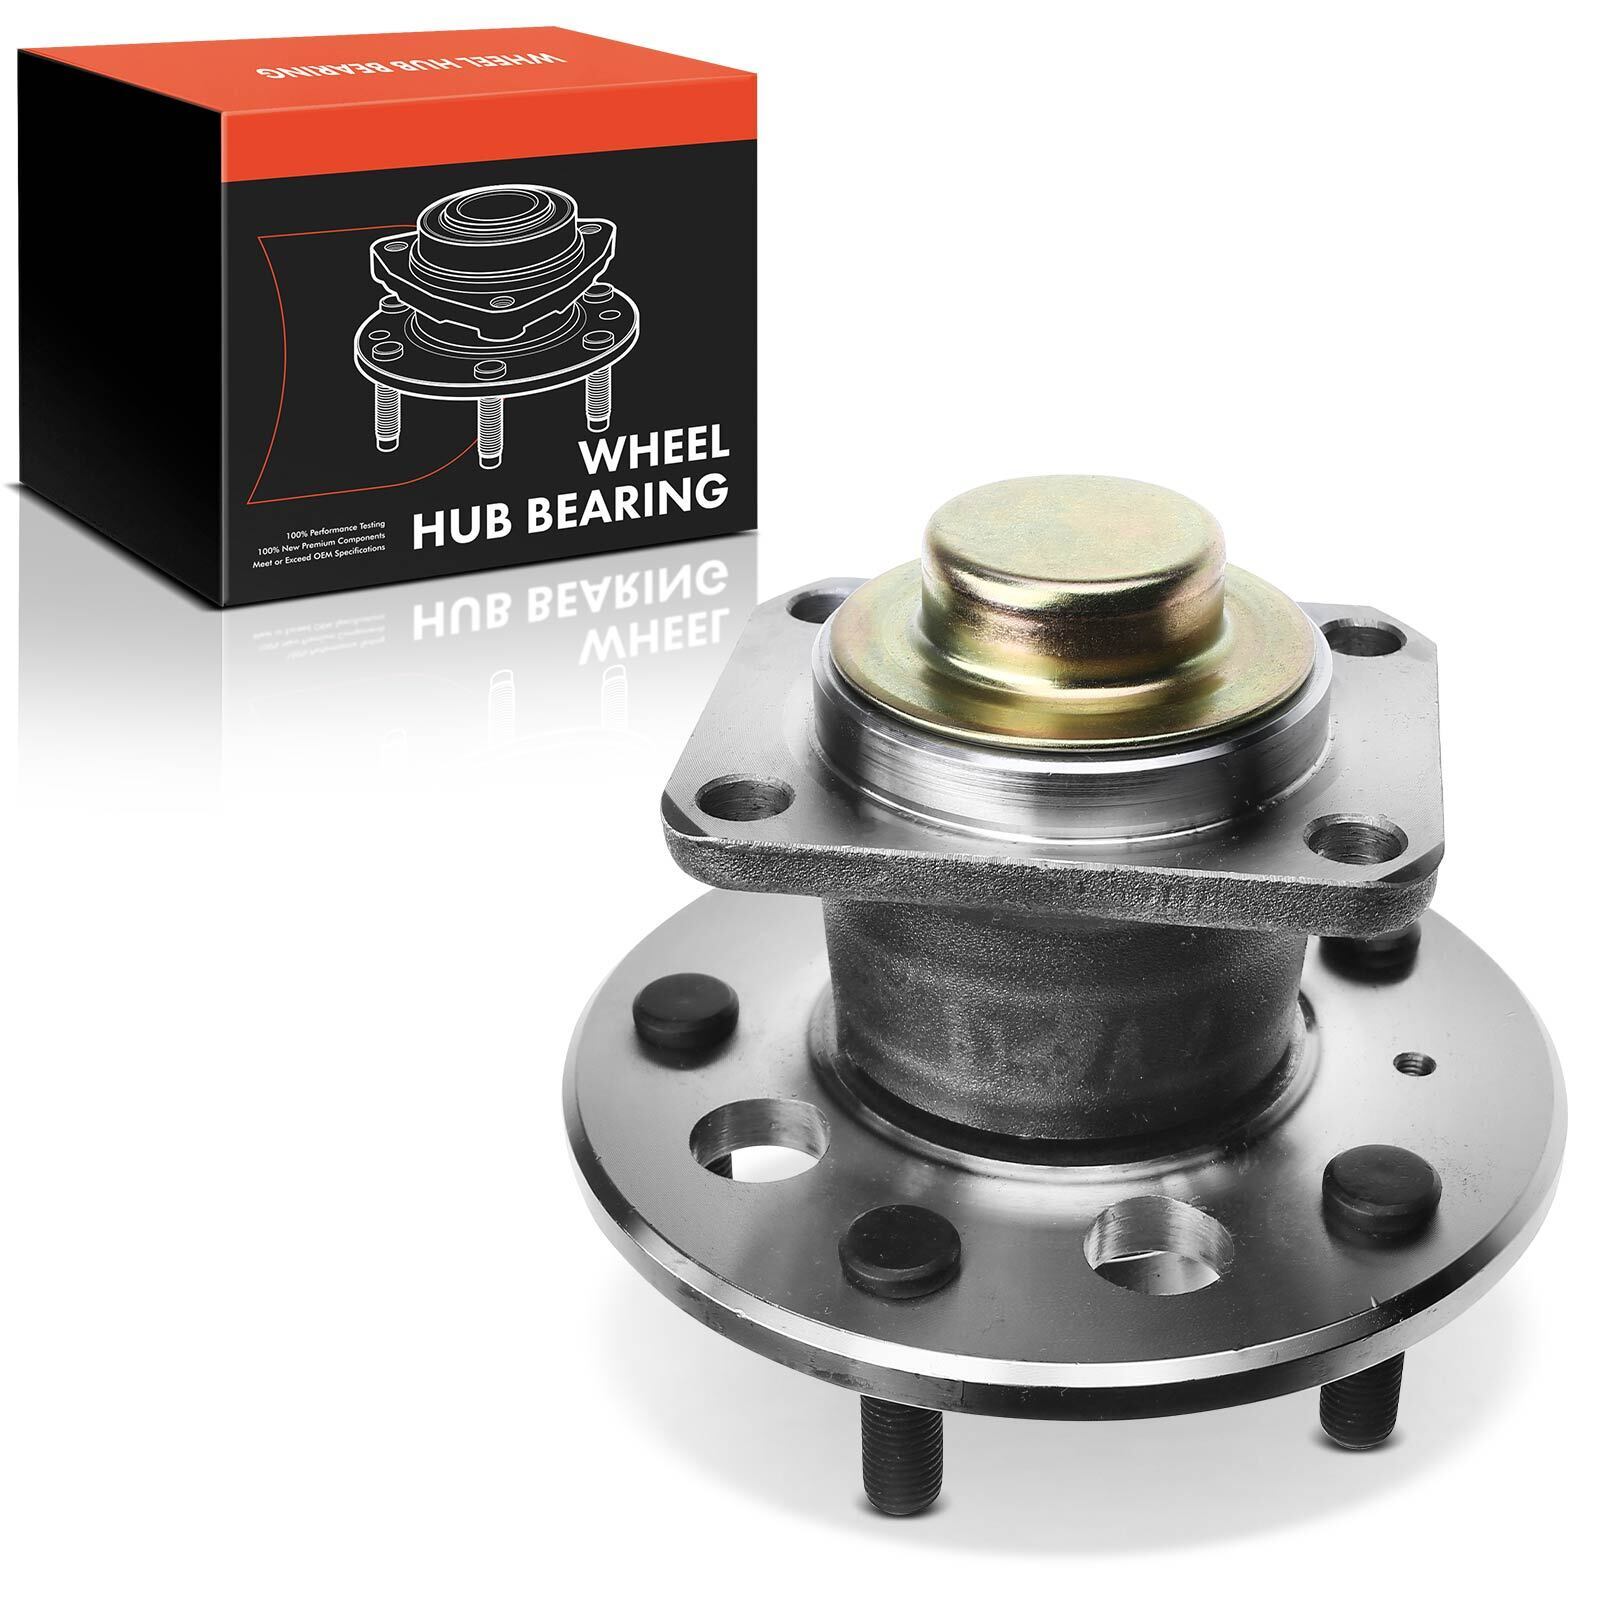 Rear Wheel Hub & Bearing Assembly for Buick Regal Chevy Pontiac Grand Prix Olds